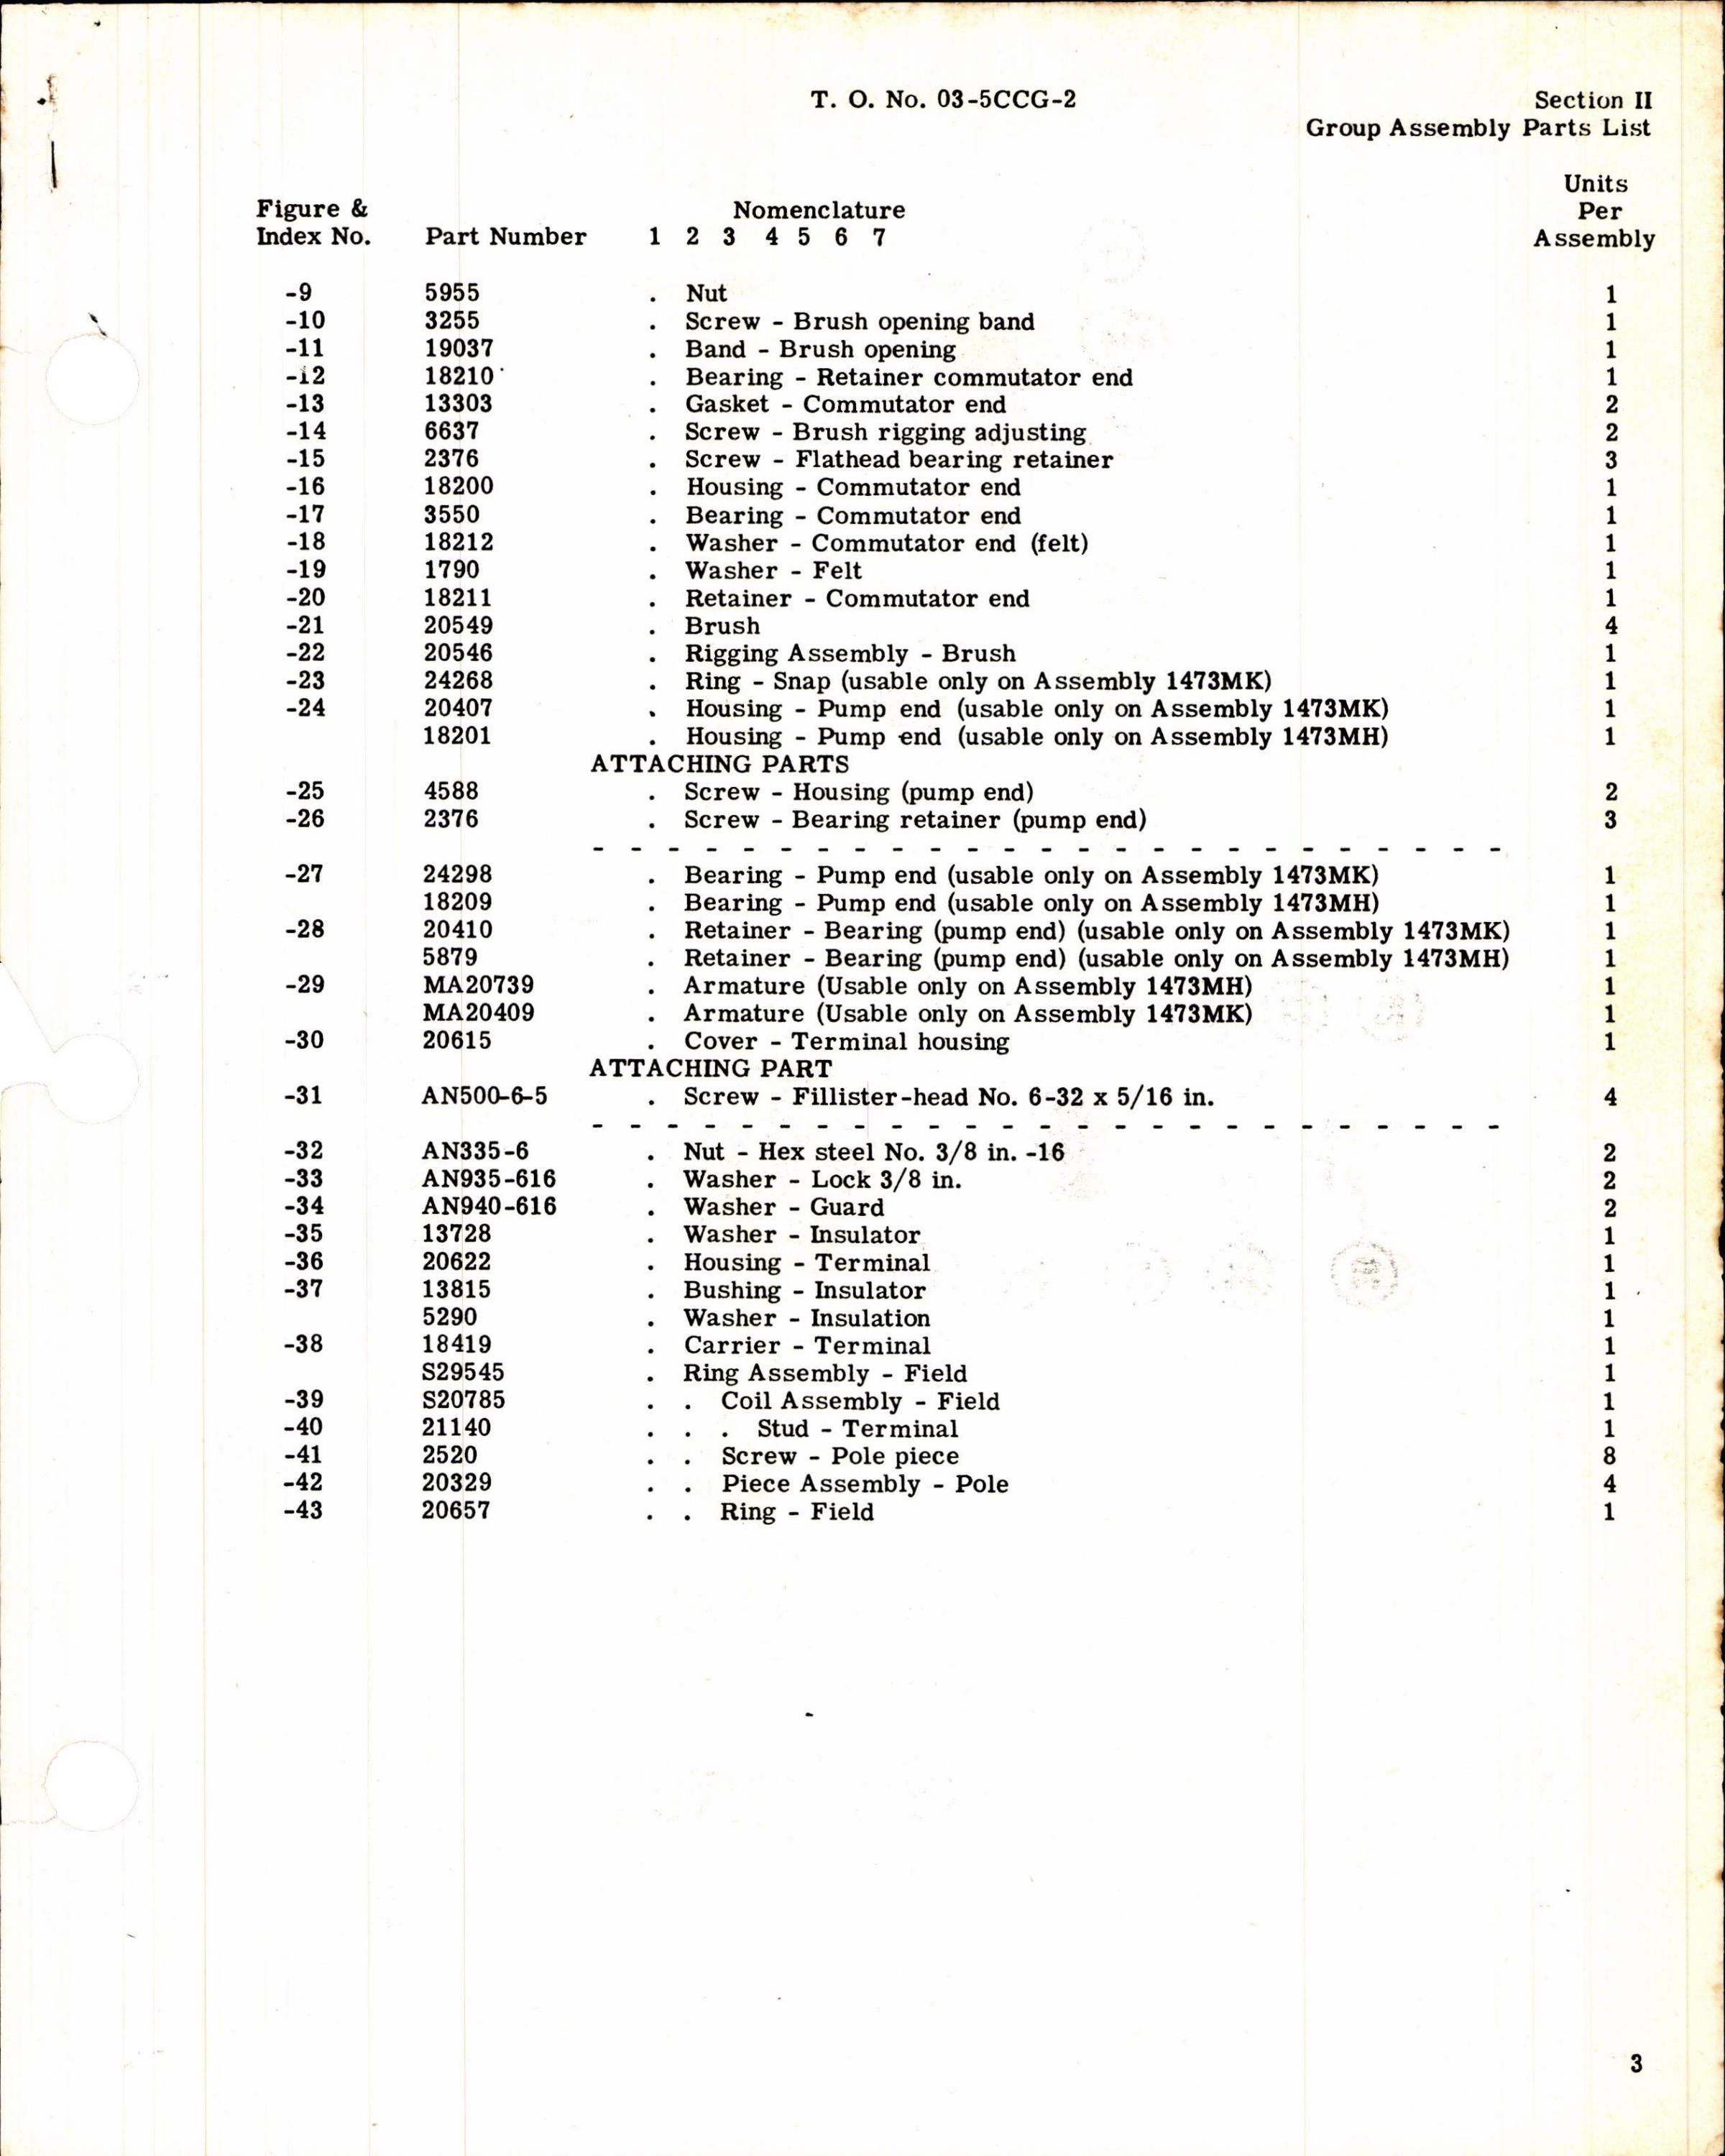 Sample page 5 from AirCorps Library document: Parts Catalog for Leece-Neville Electric Motor